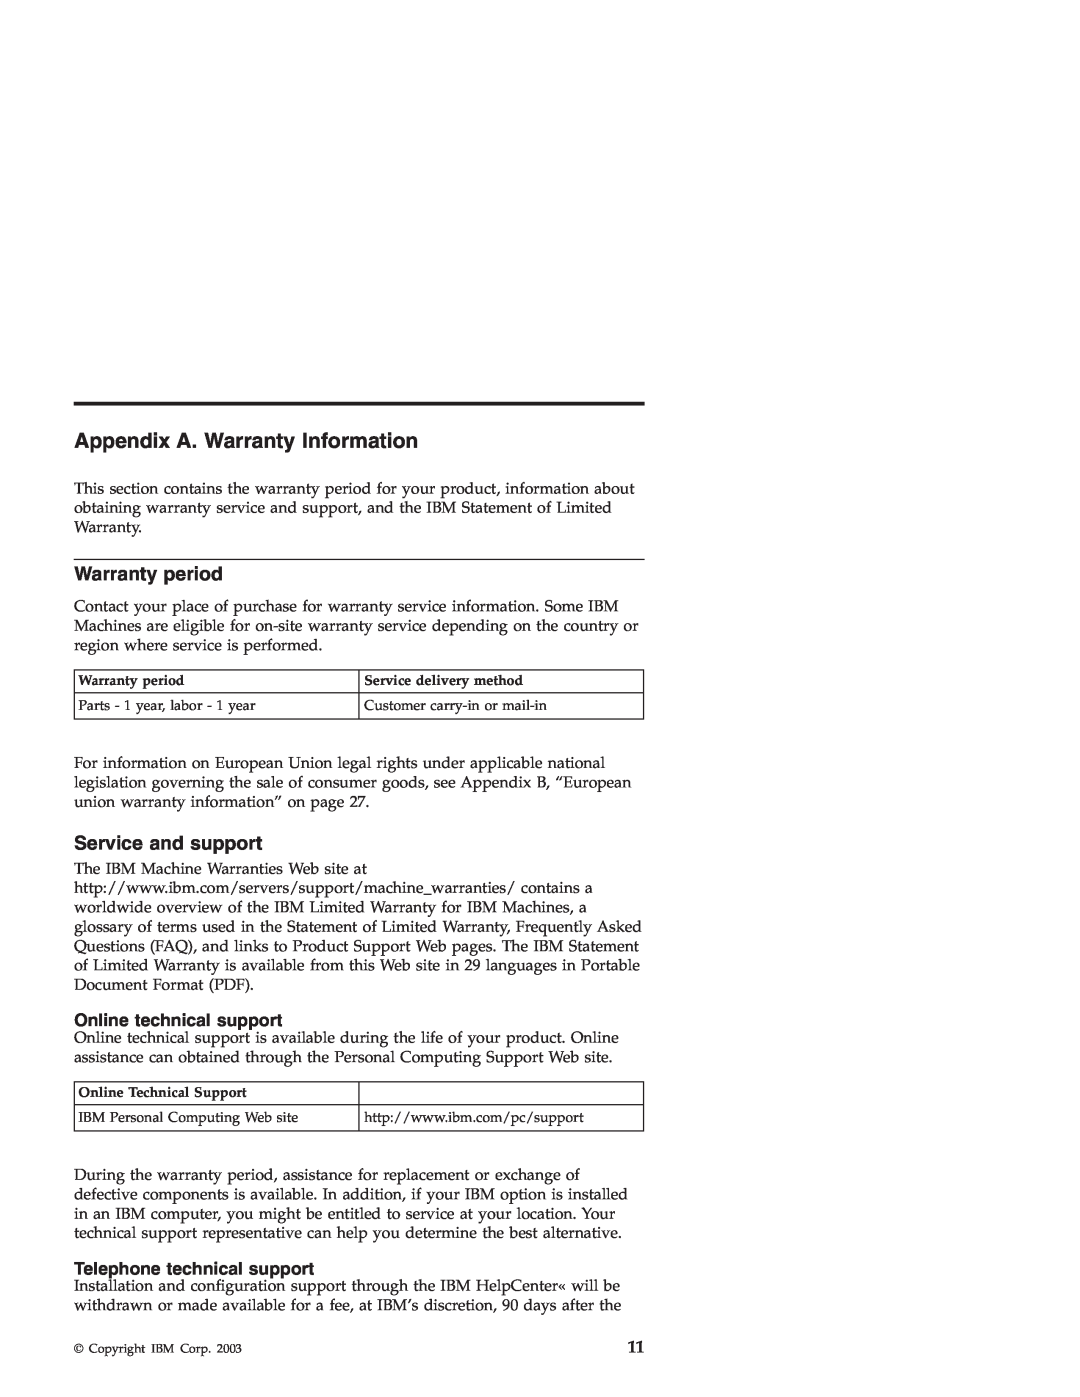 IBM 22P7007 manual Appendix A. Warranty Information, Warranty period, Service and support, Online technical support 